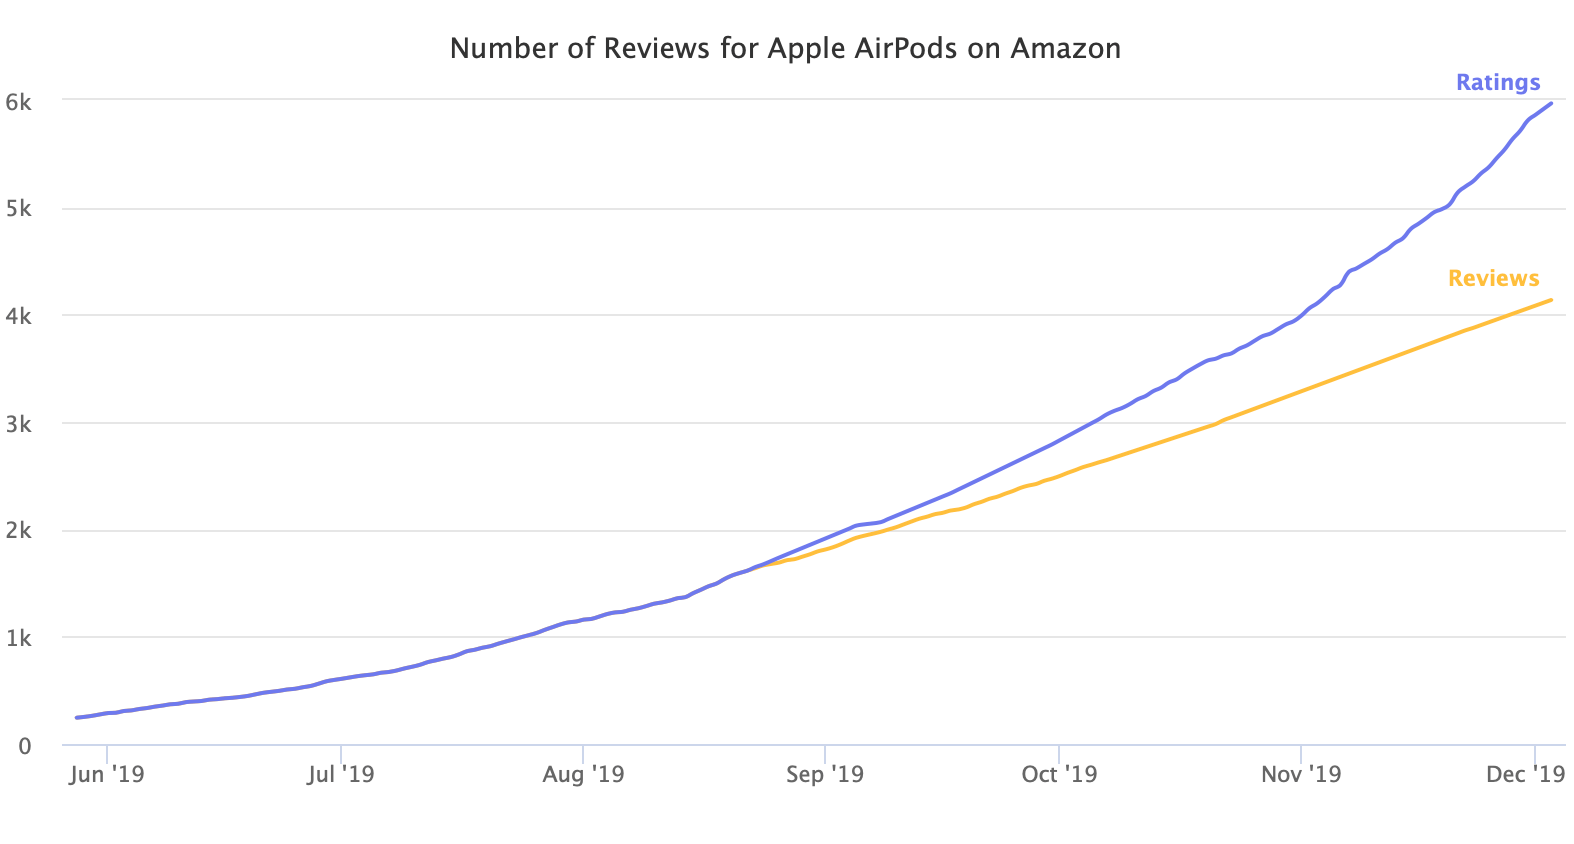 Number of Reviews for Apple AirPods on Amazon